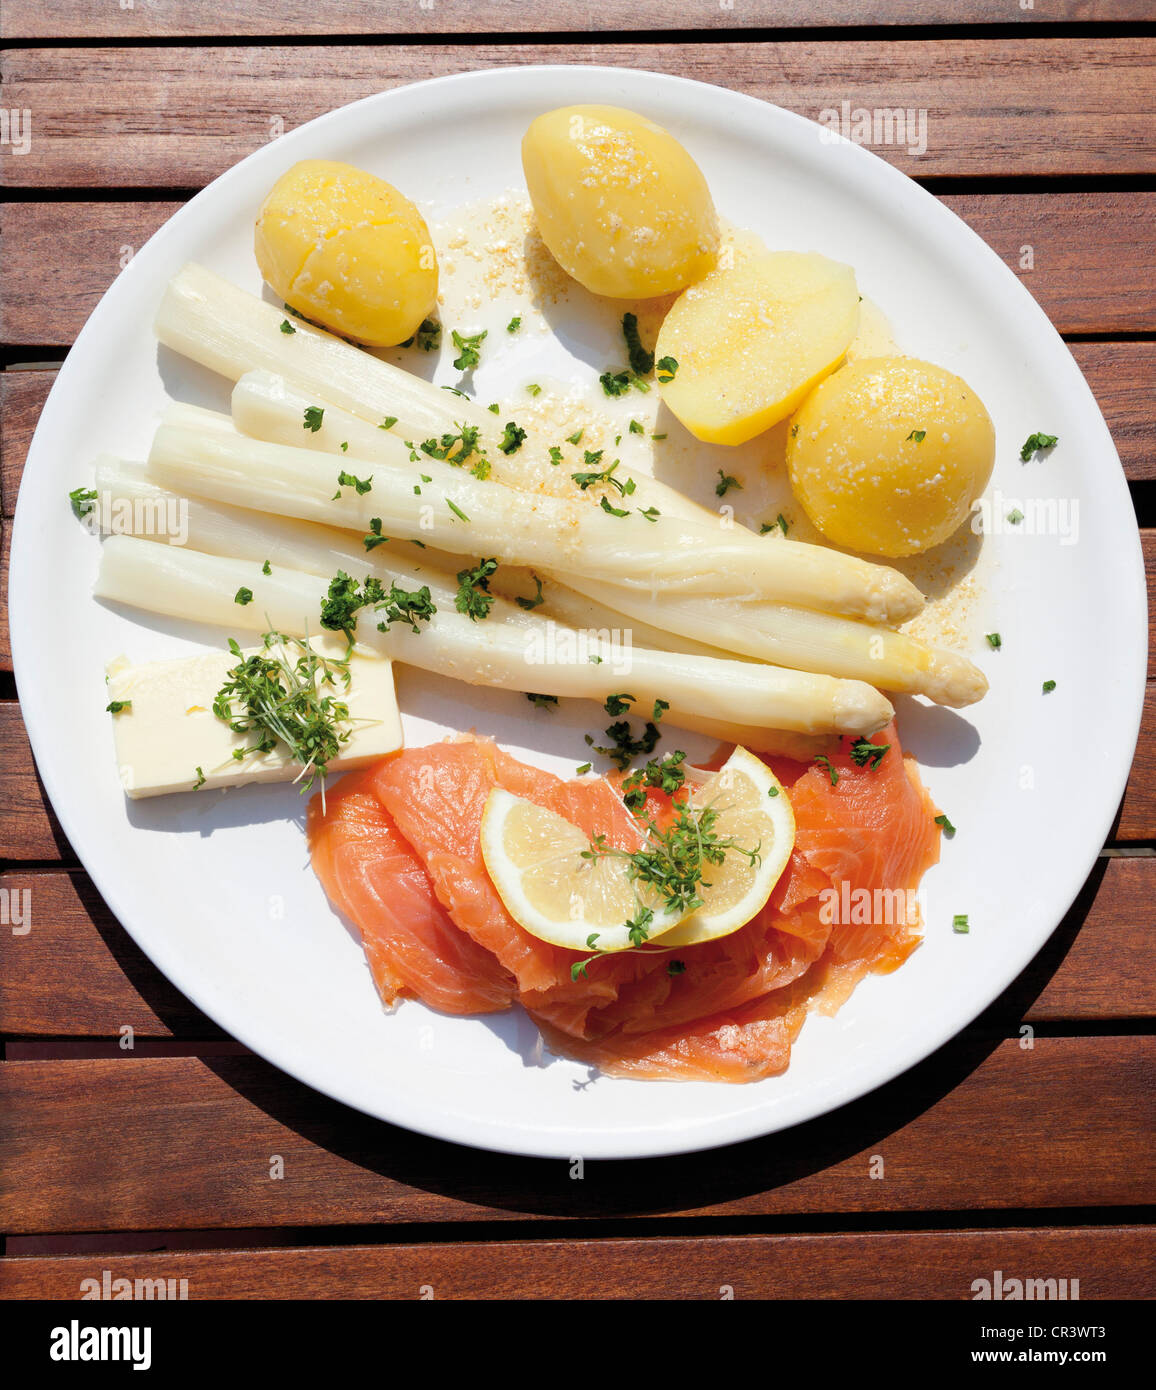 Asparagus with Hollandaise sauce, smoked salmon and boiled potatoes ...